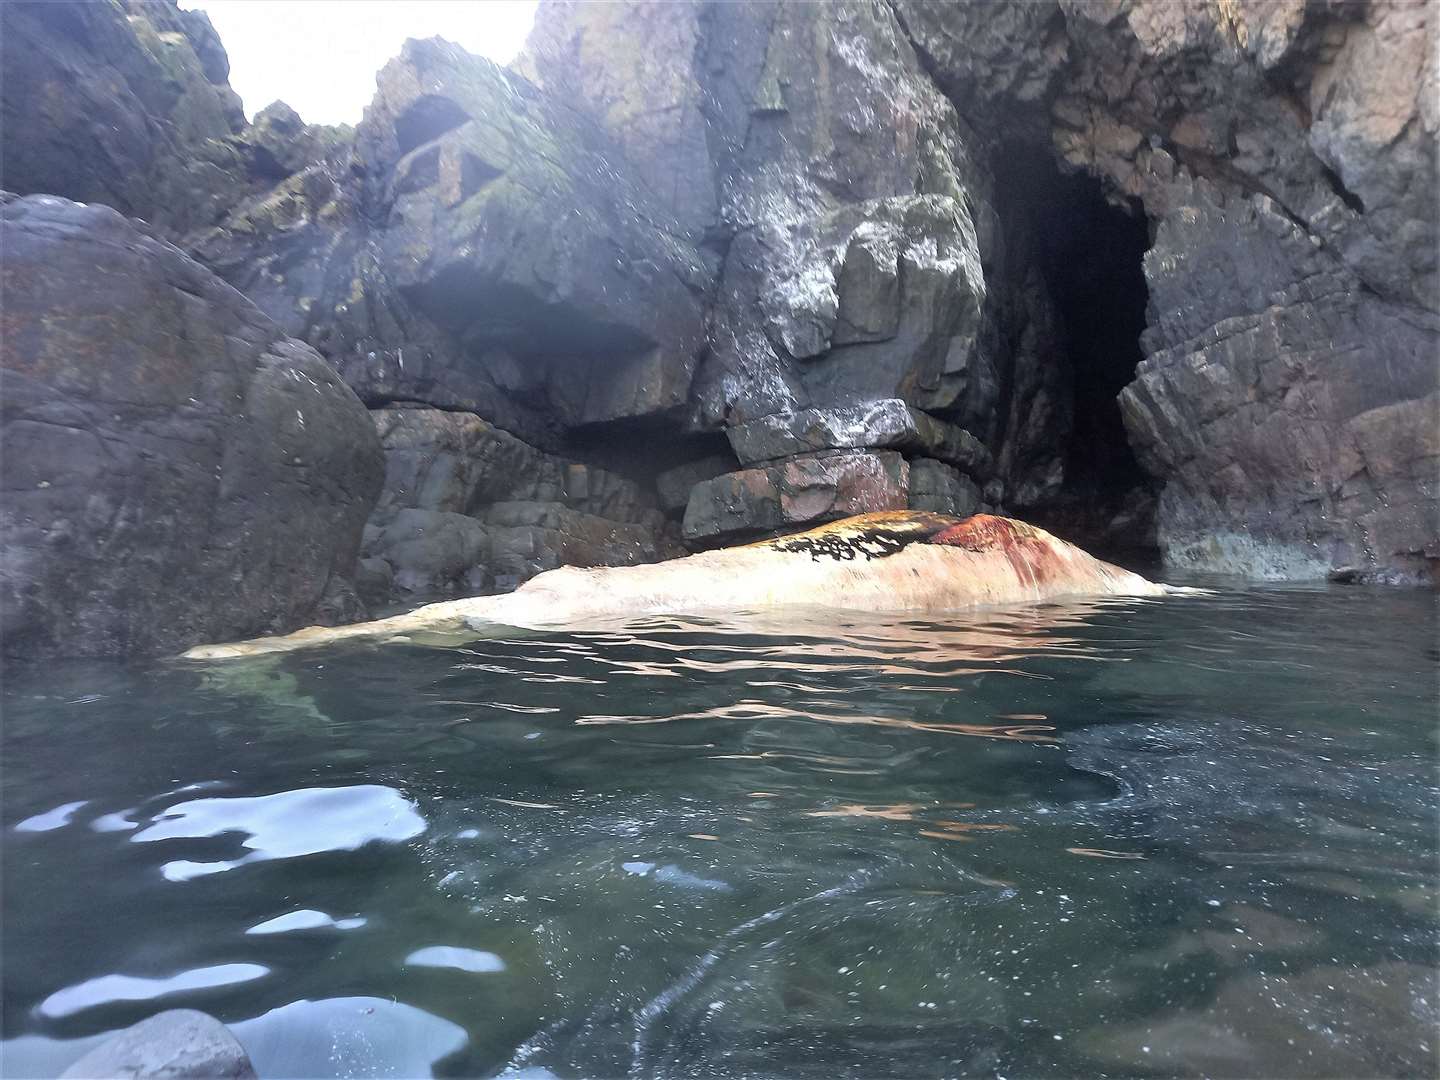 What is thought to be a dead minke whale that the kayakers saw at the coast near Berriedale last week.